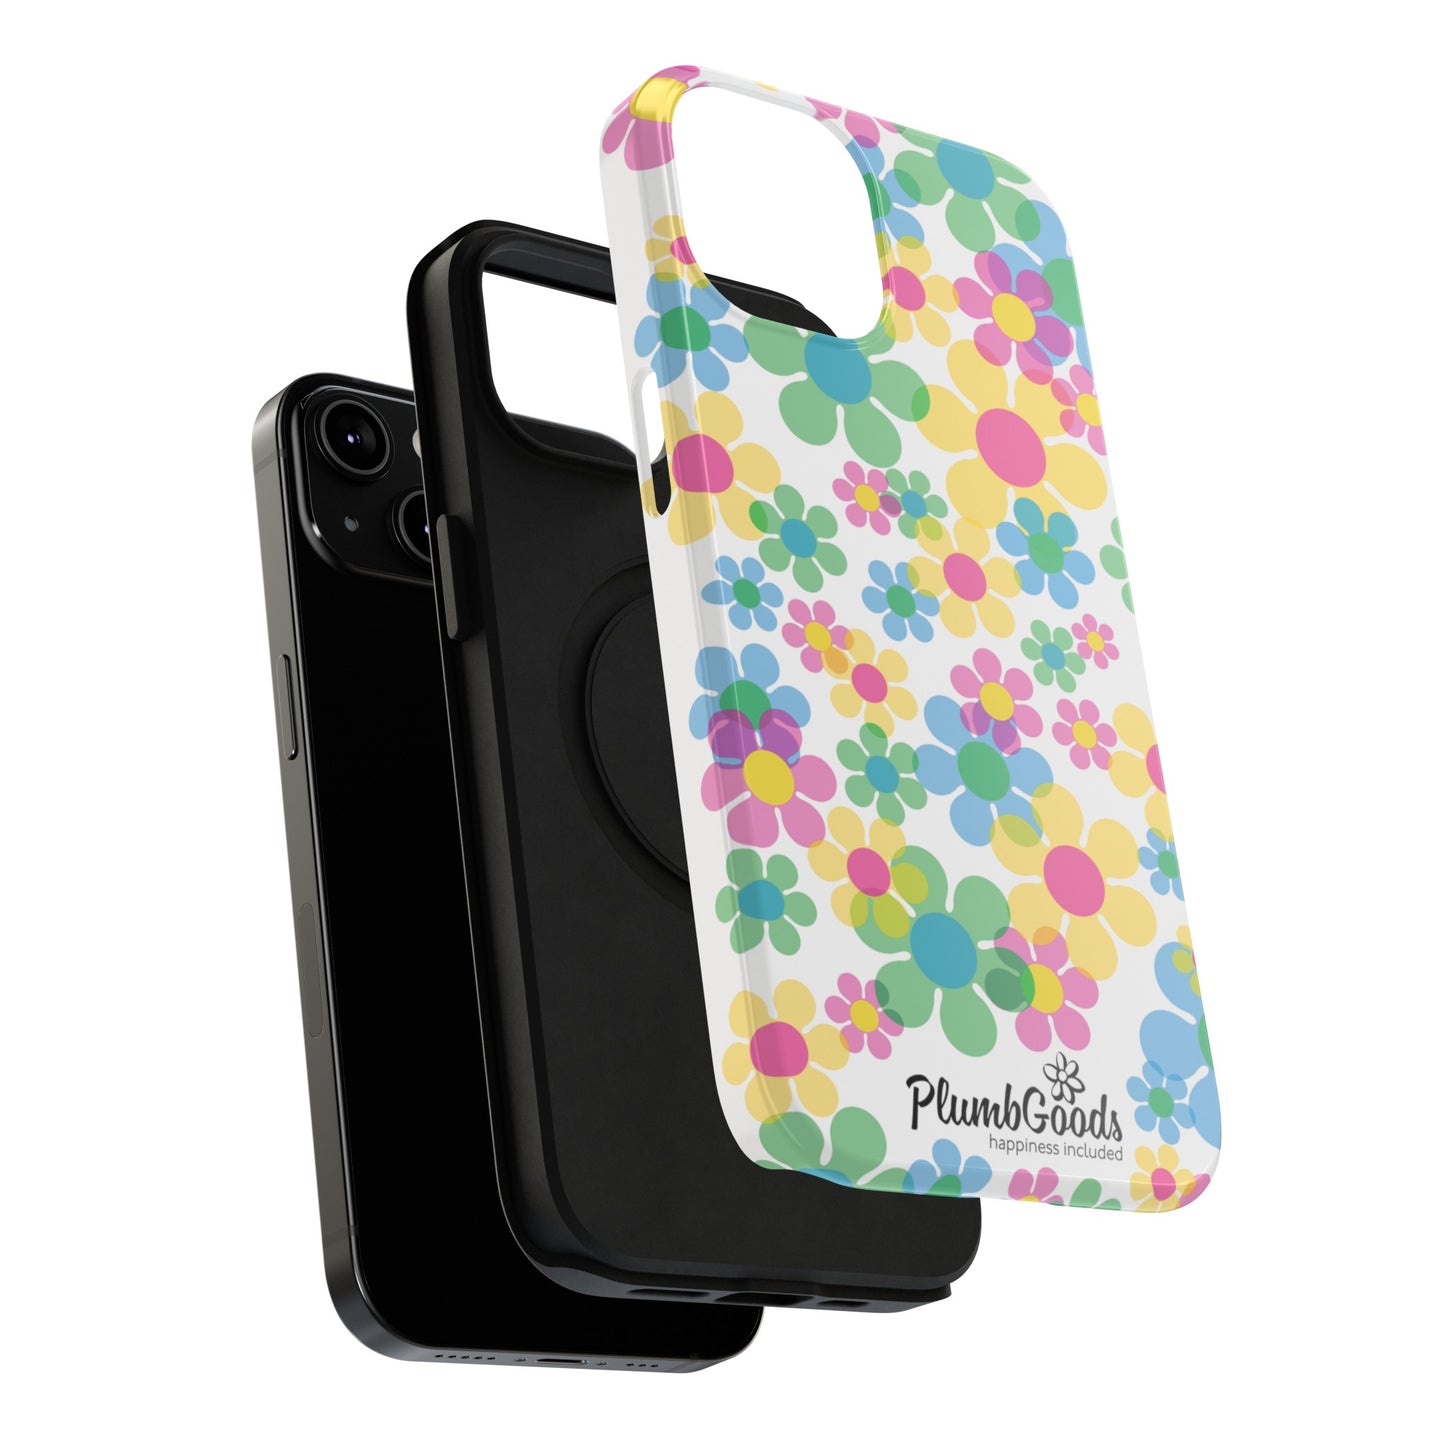 Impact-Resistant Floating Daises Case for Iphone & Samsung